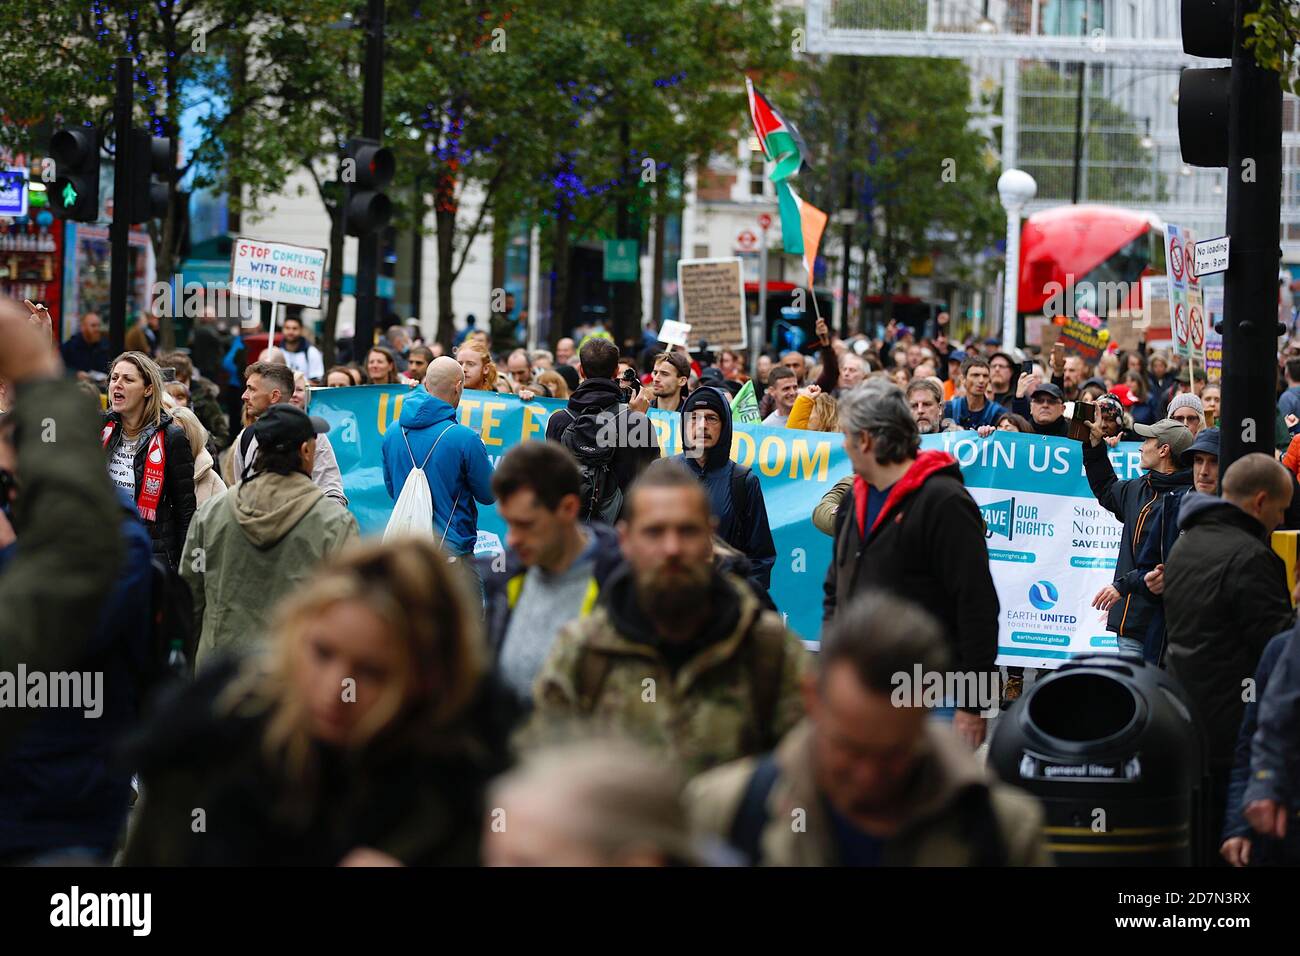 Hyde Park, London, UK. 24 October, 2020. Further action by anti lockdown protesters who are meeting and protesting in Hyde Park, London. No social distancing is being observed and no masks worn by attendants. The March proceeds down Oxford street. Photo Credit: Paul Lawrenson-PAL Media/Alamy Live News Stock Photo